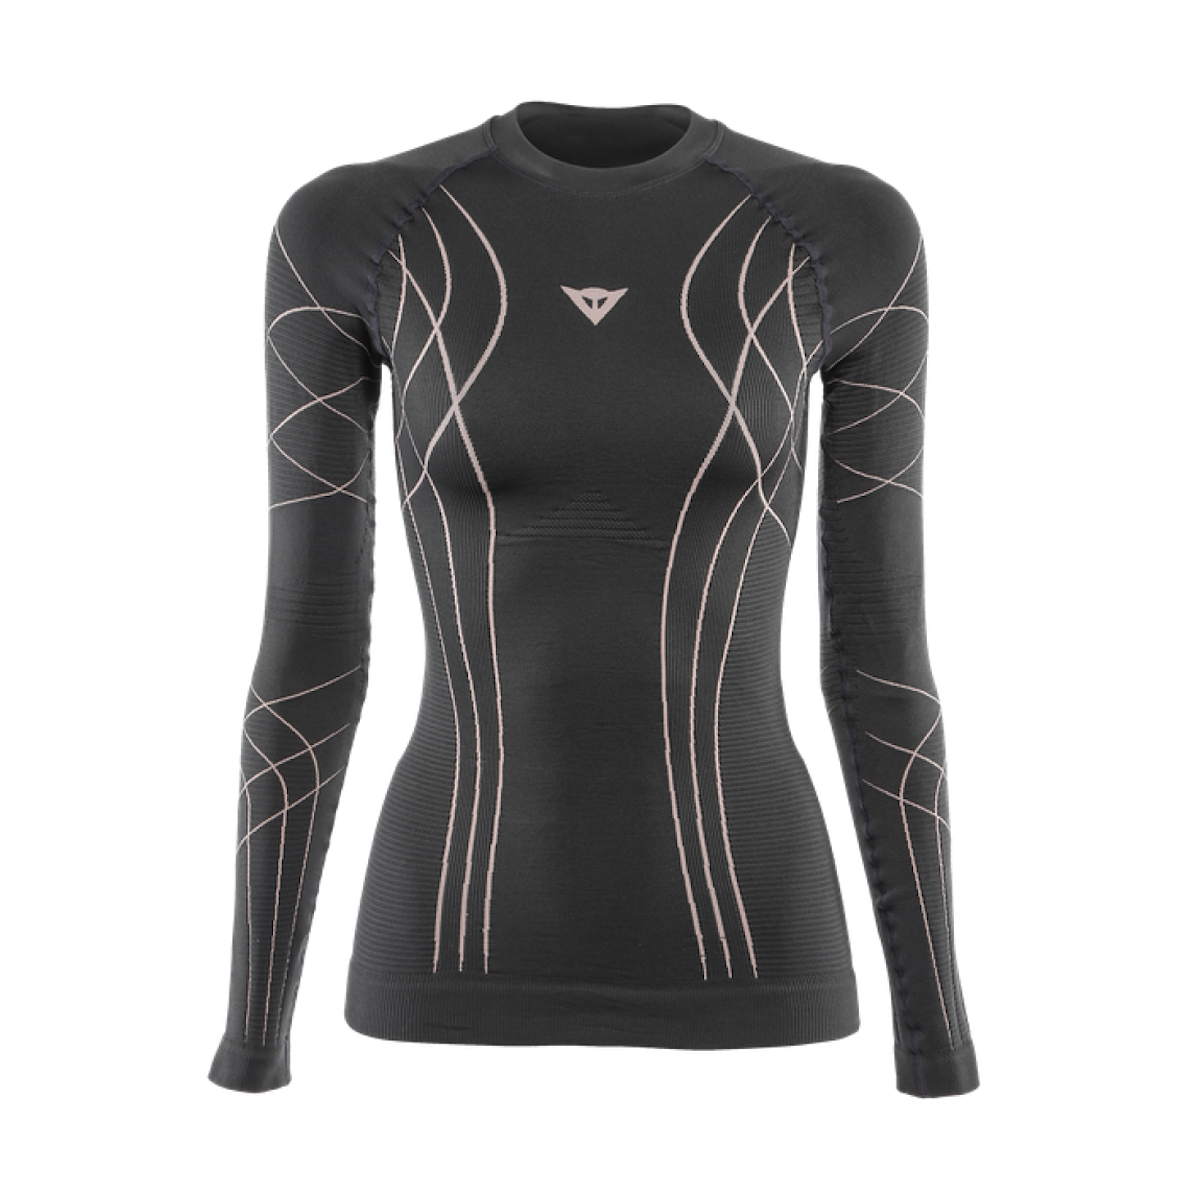 DAINESE HP1 BL L thermo shirt - black/pink